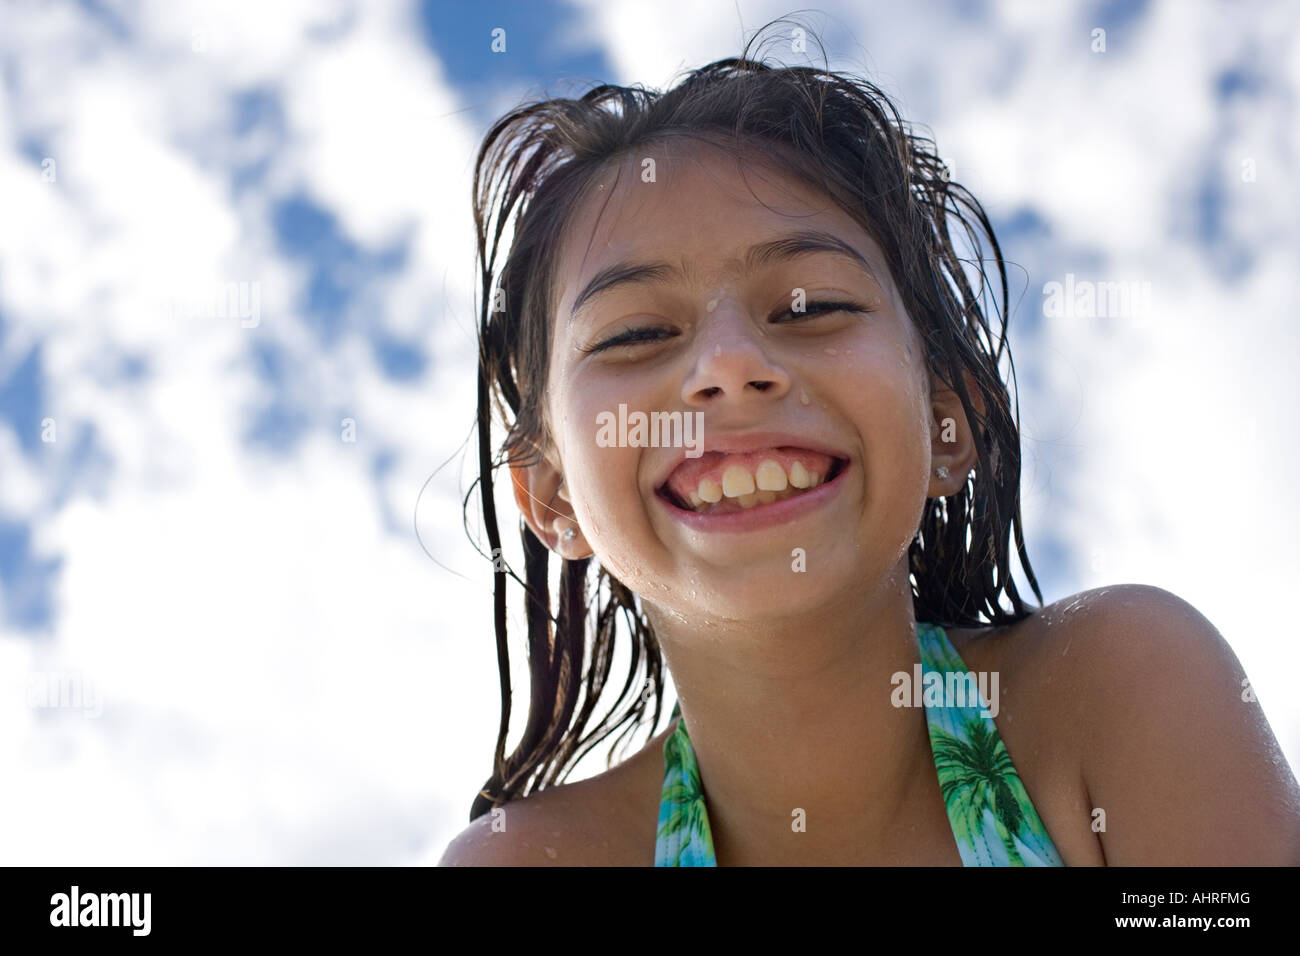 Girl 10 12 in bikini hi-res stock photography and images - Alamy